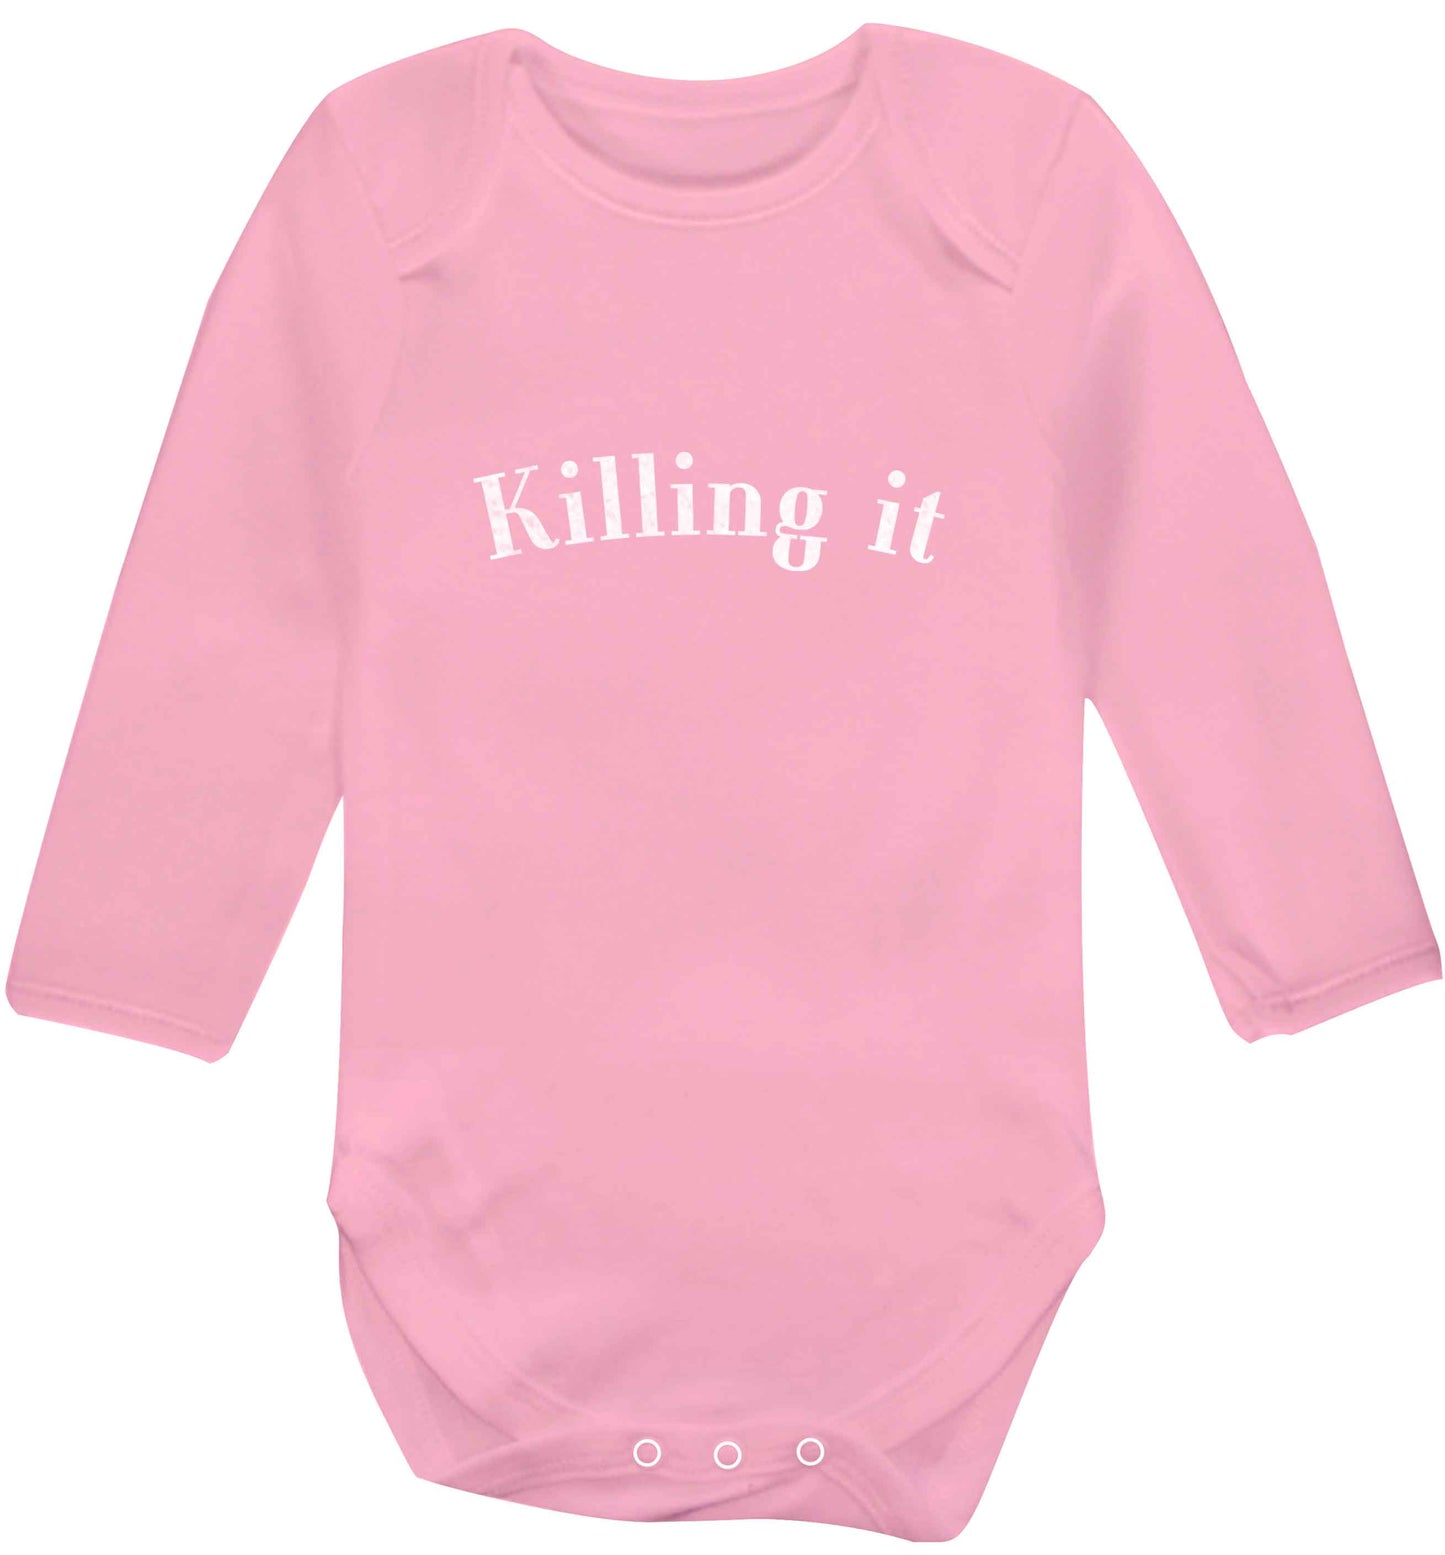 Killing it baby vest long sleeved pale pink 6-12 months